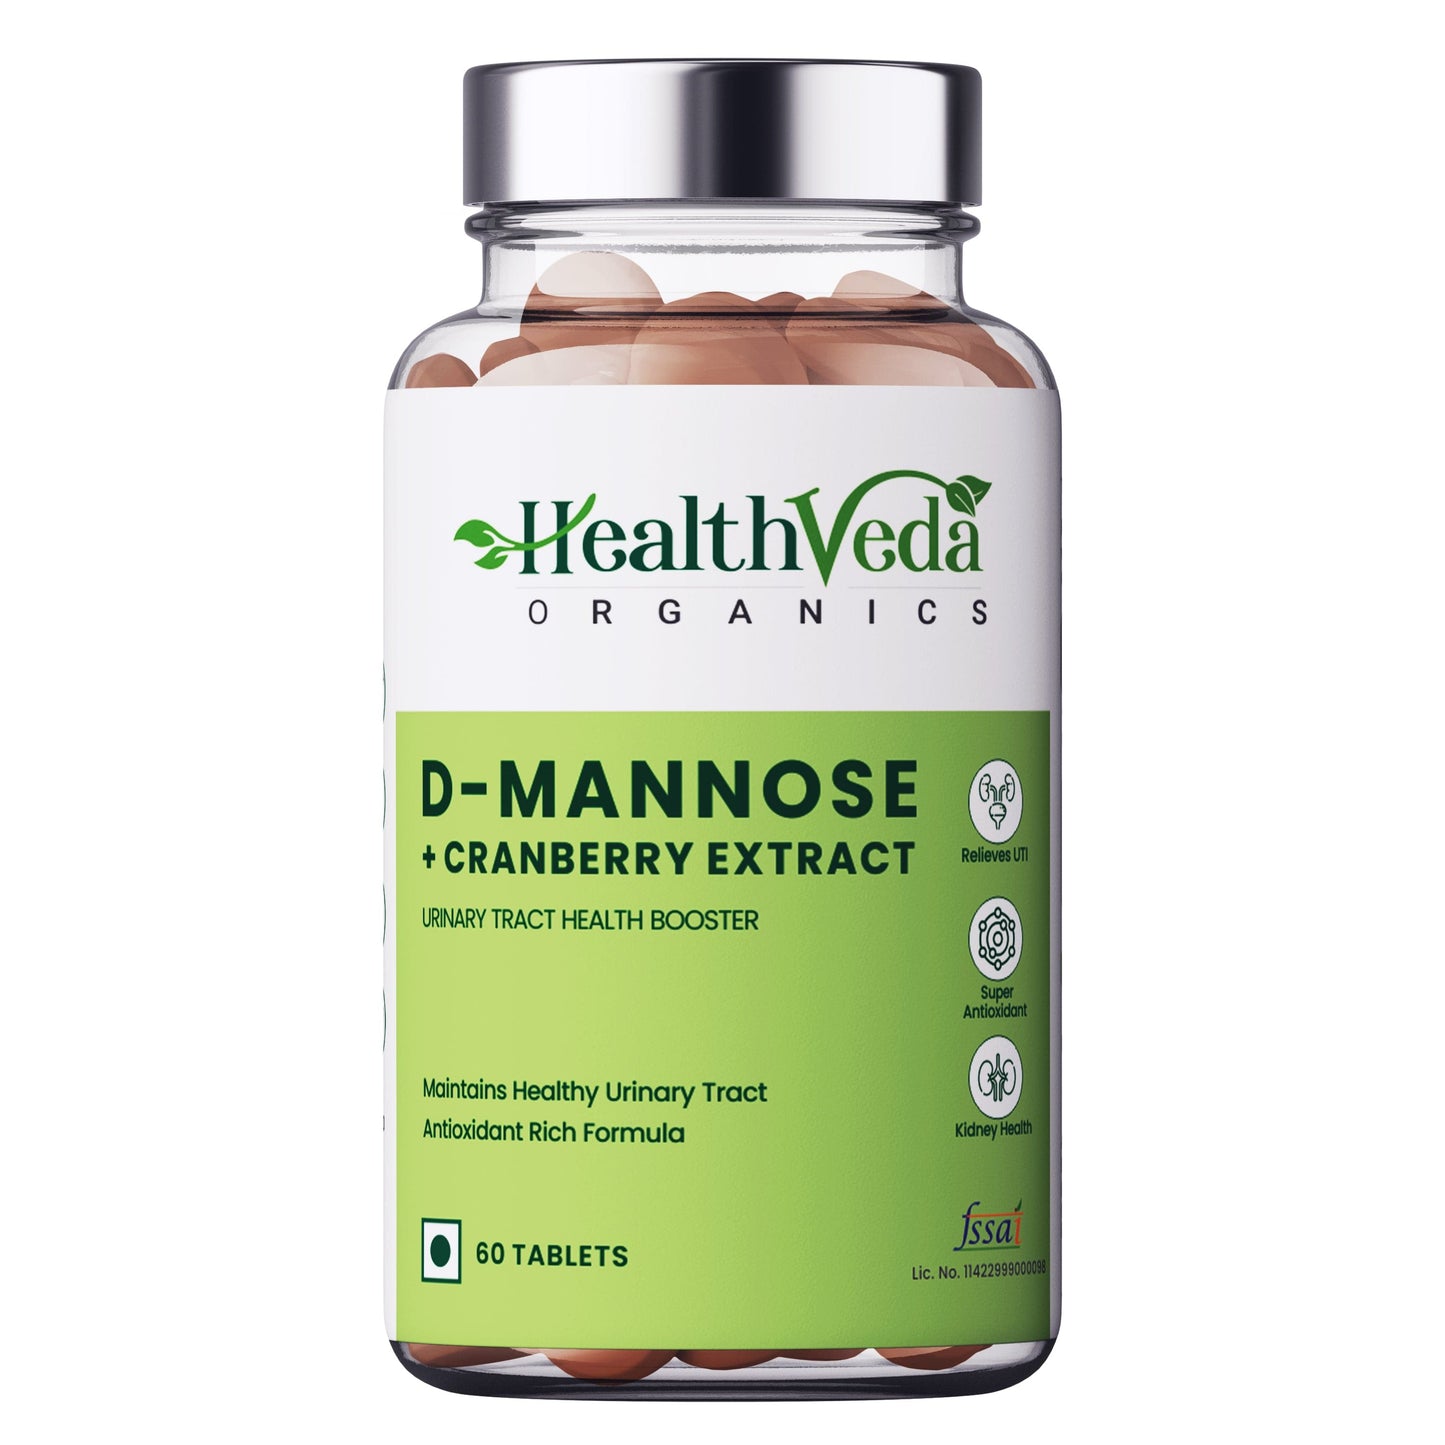 Health Veda Organics D-Mannose 500 mg + Cranberry Extract 200 mg | 60 Veg Tablets I Supports Kidney Health & Urinary Tract Infection